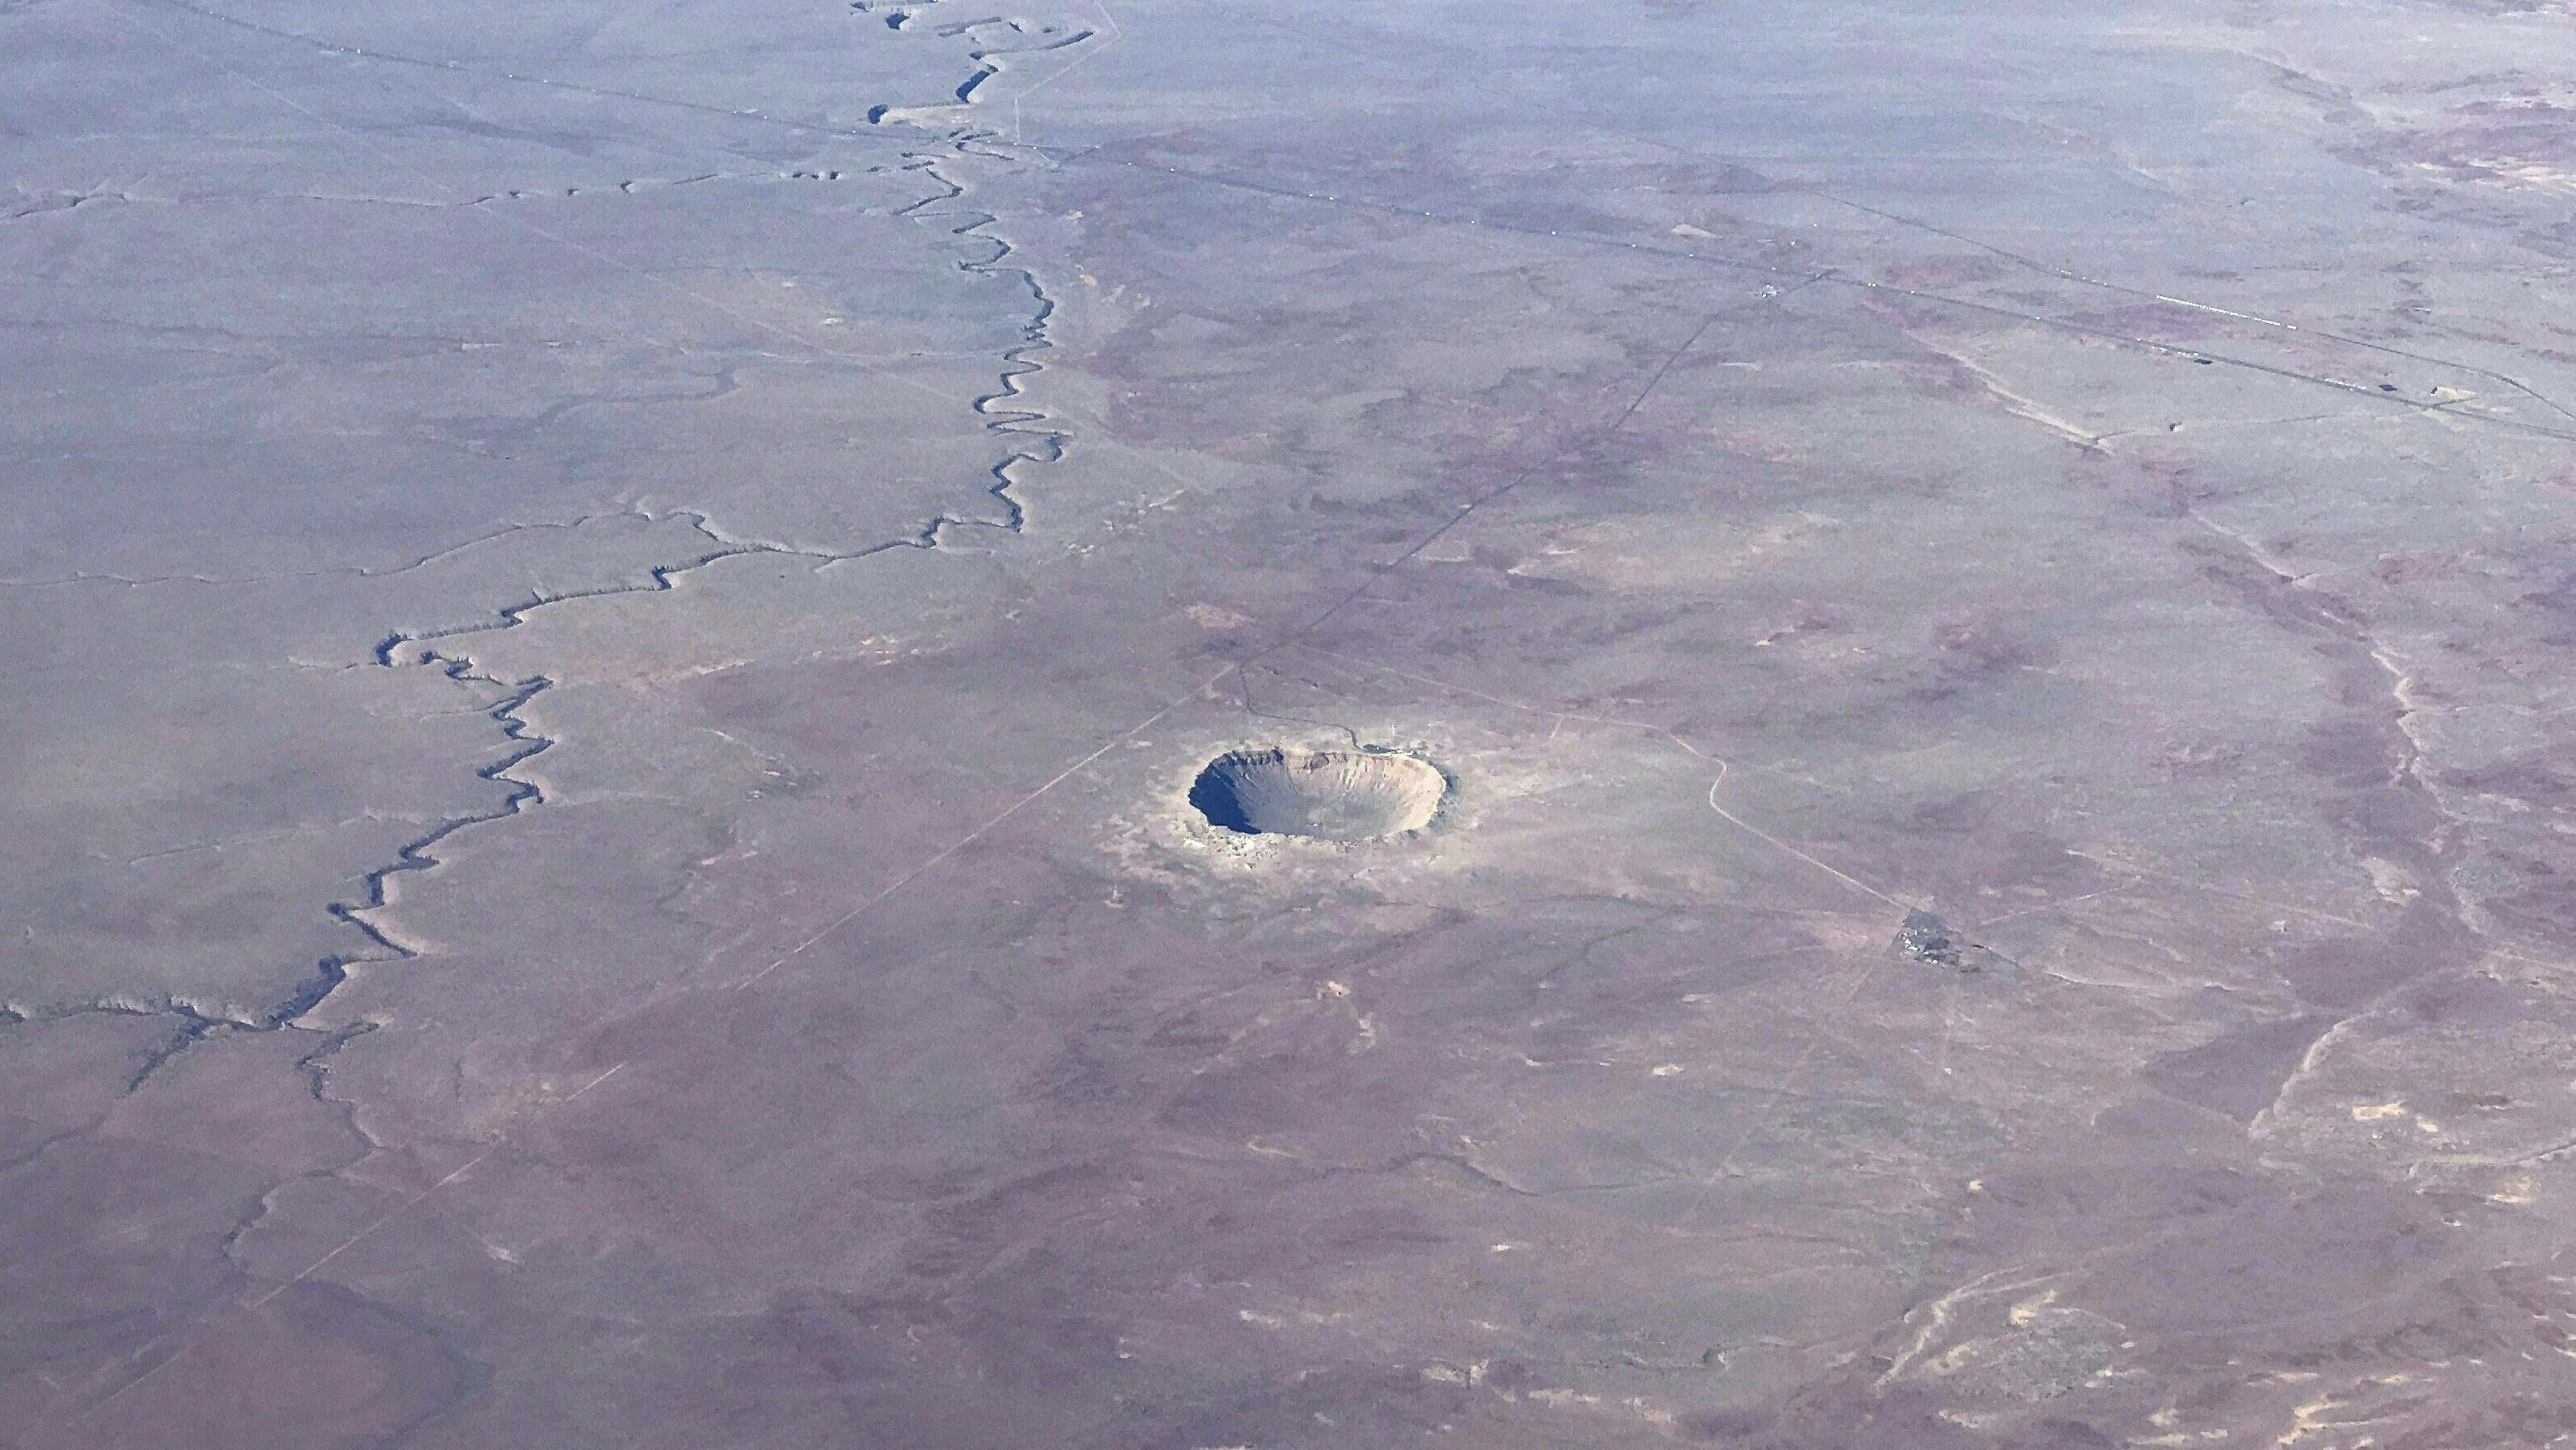 Meteor Crater in Arizona, as seen from a plane in January 2017. (Photo: DANIEL SLIM/AFP, Getty Images)